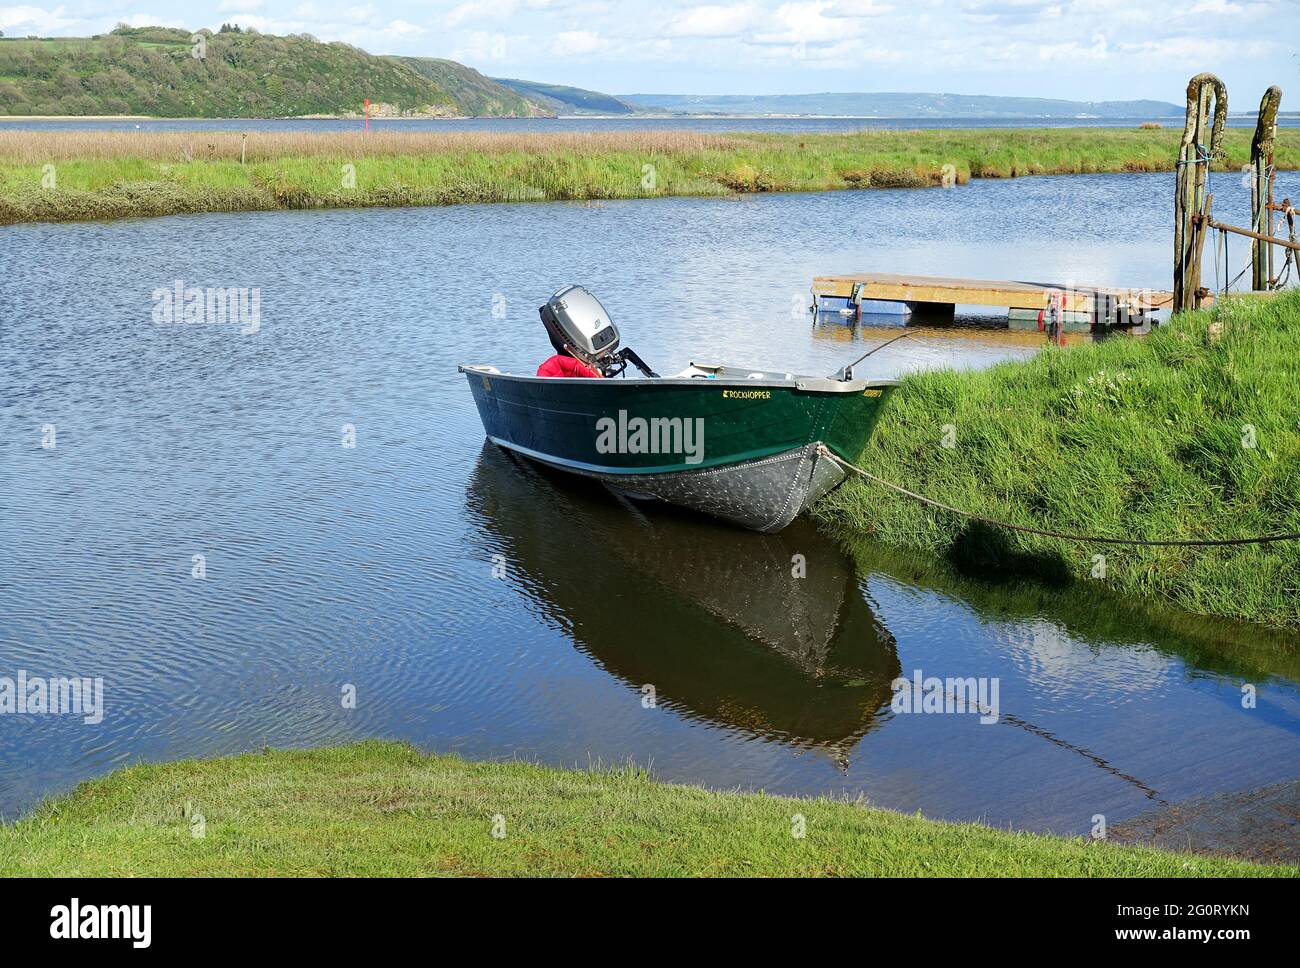 Fisherman's dinghy on the River Coran, Laugharne, Carmarthenshire, Wales Stock Photo